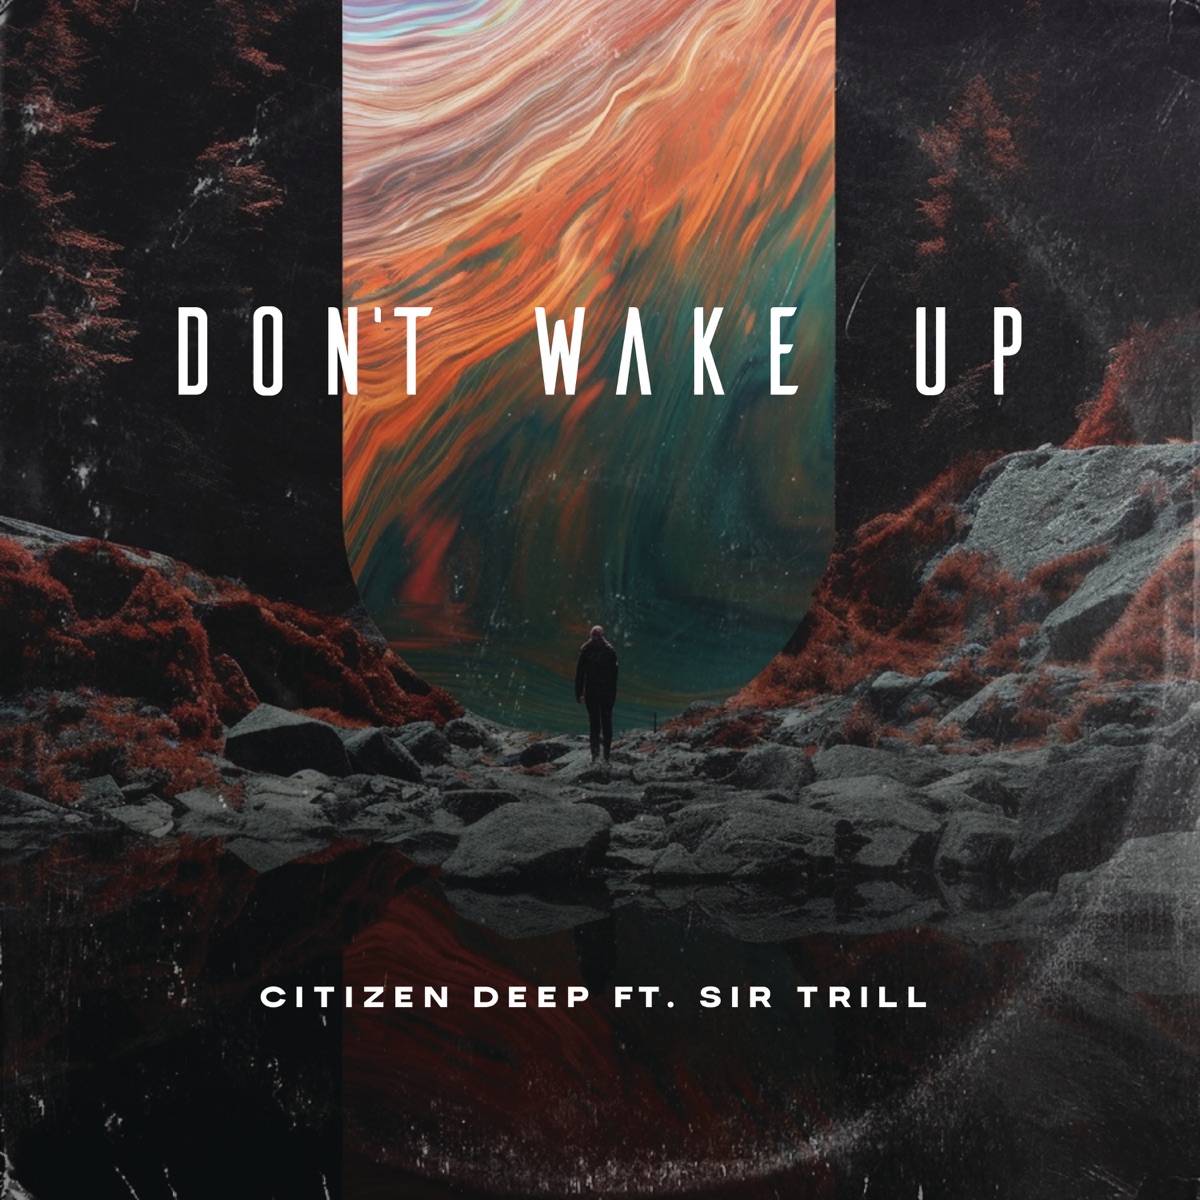 MP3: Citizen Deep Ft. Sir Trill – Don’t Wake Up